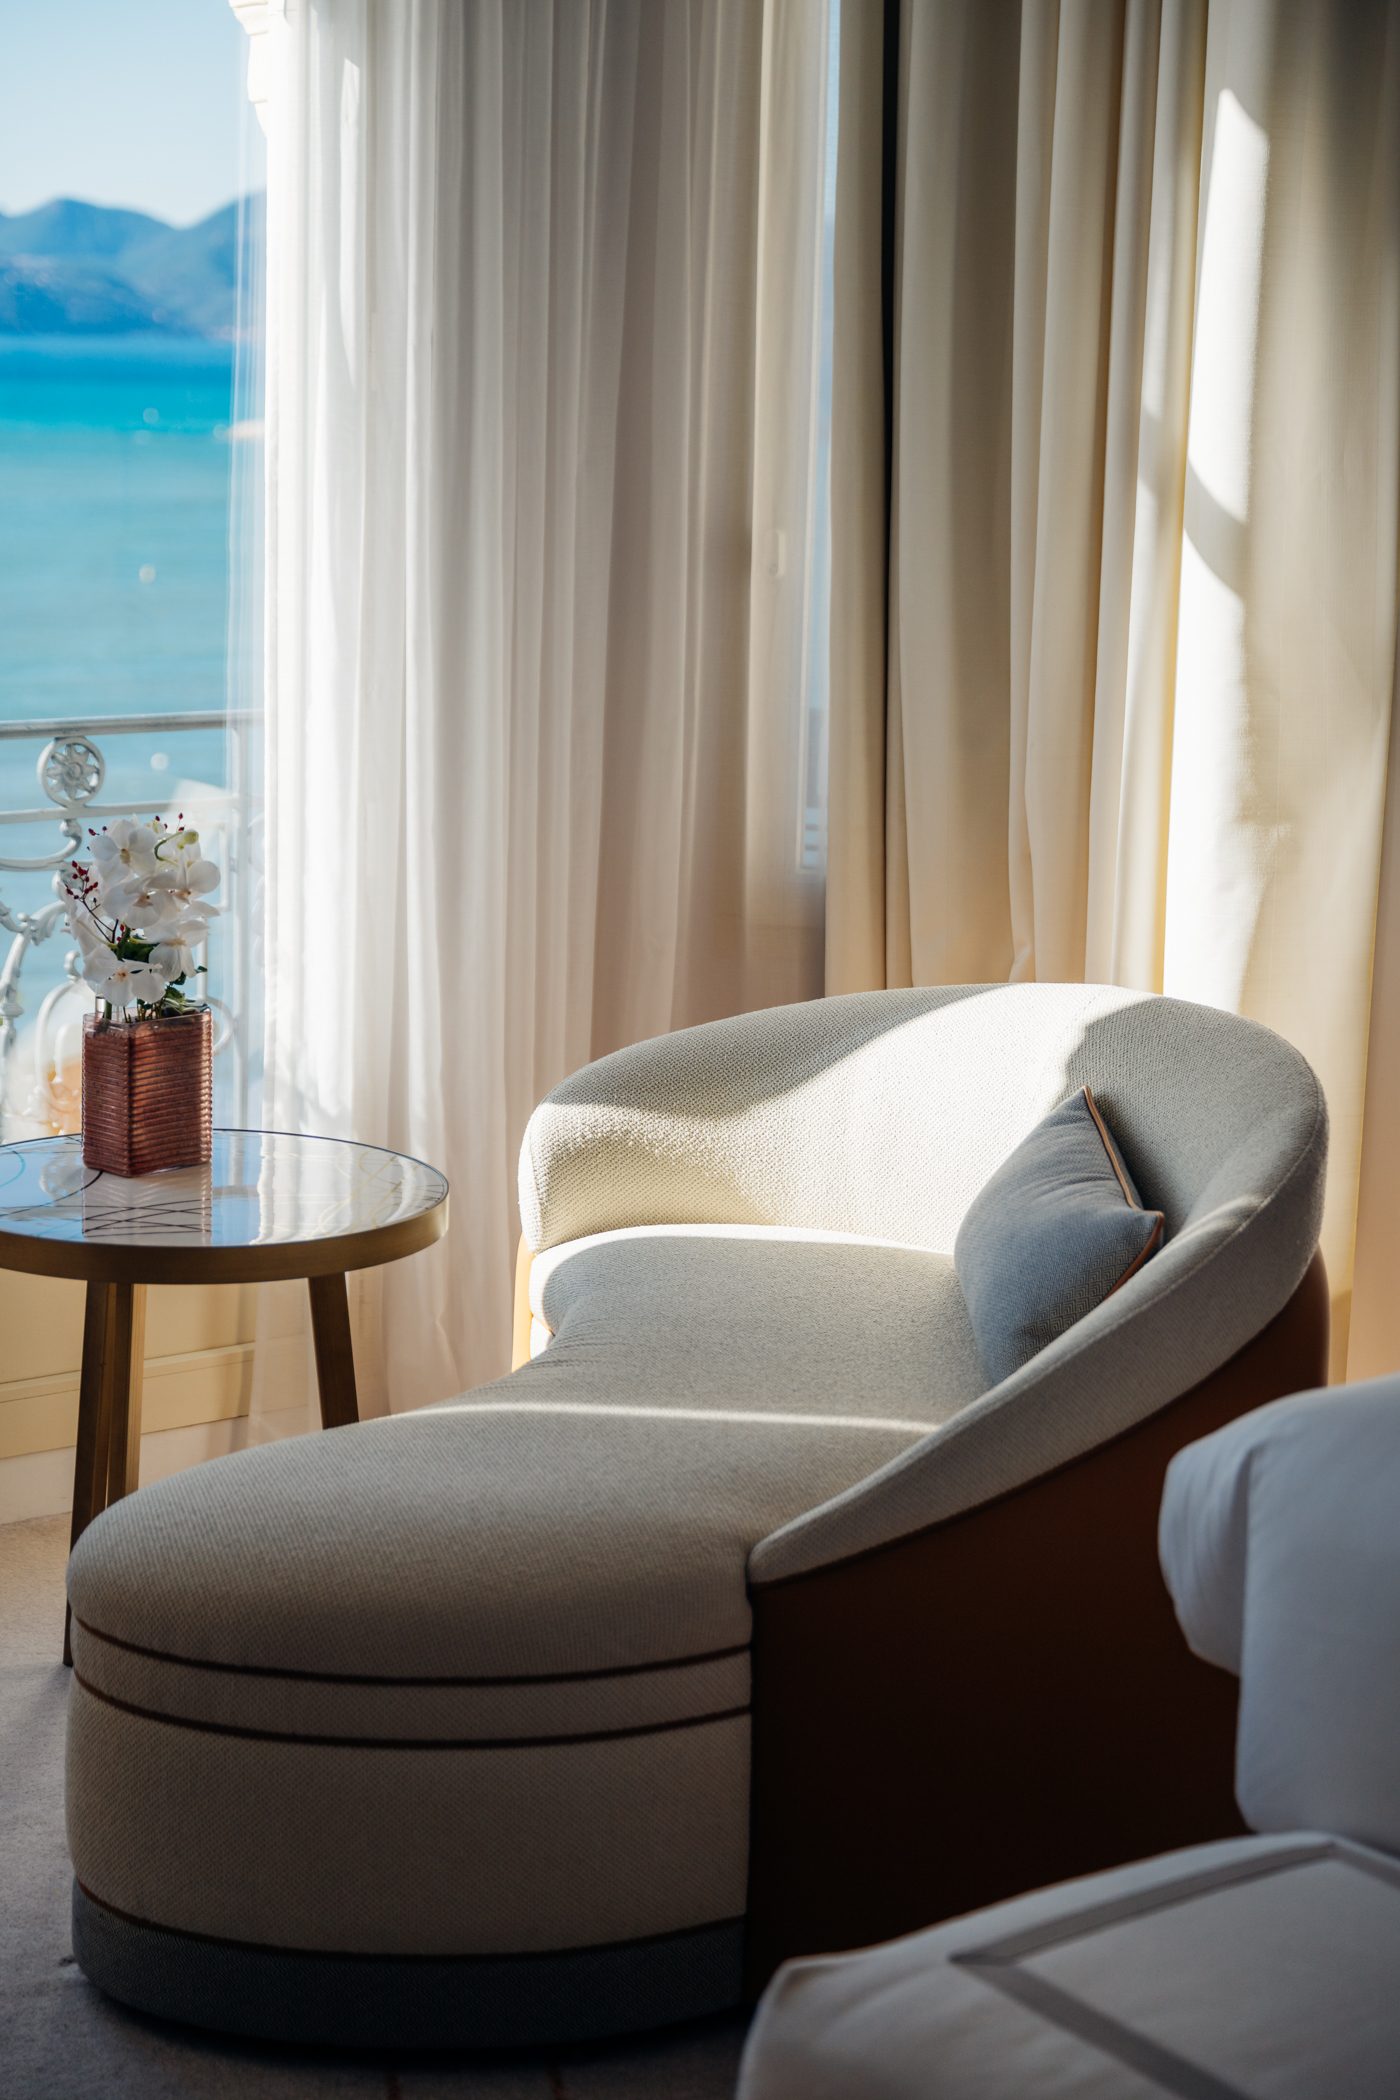 Carlton Cannes Hotel, Croisette - part of our Winter at the Côte d‘Azur in France: A travel guide